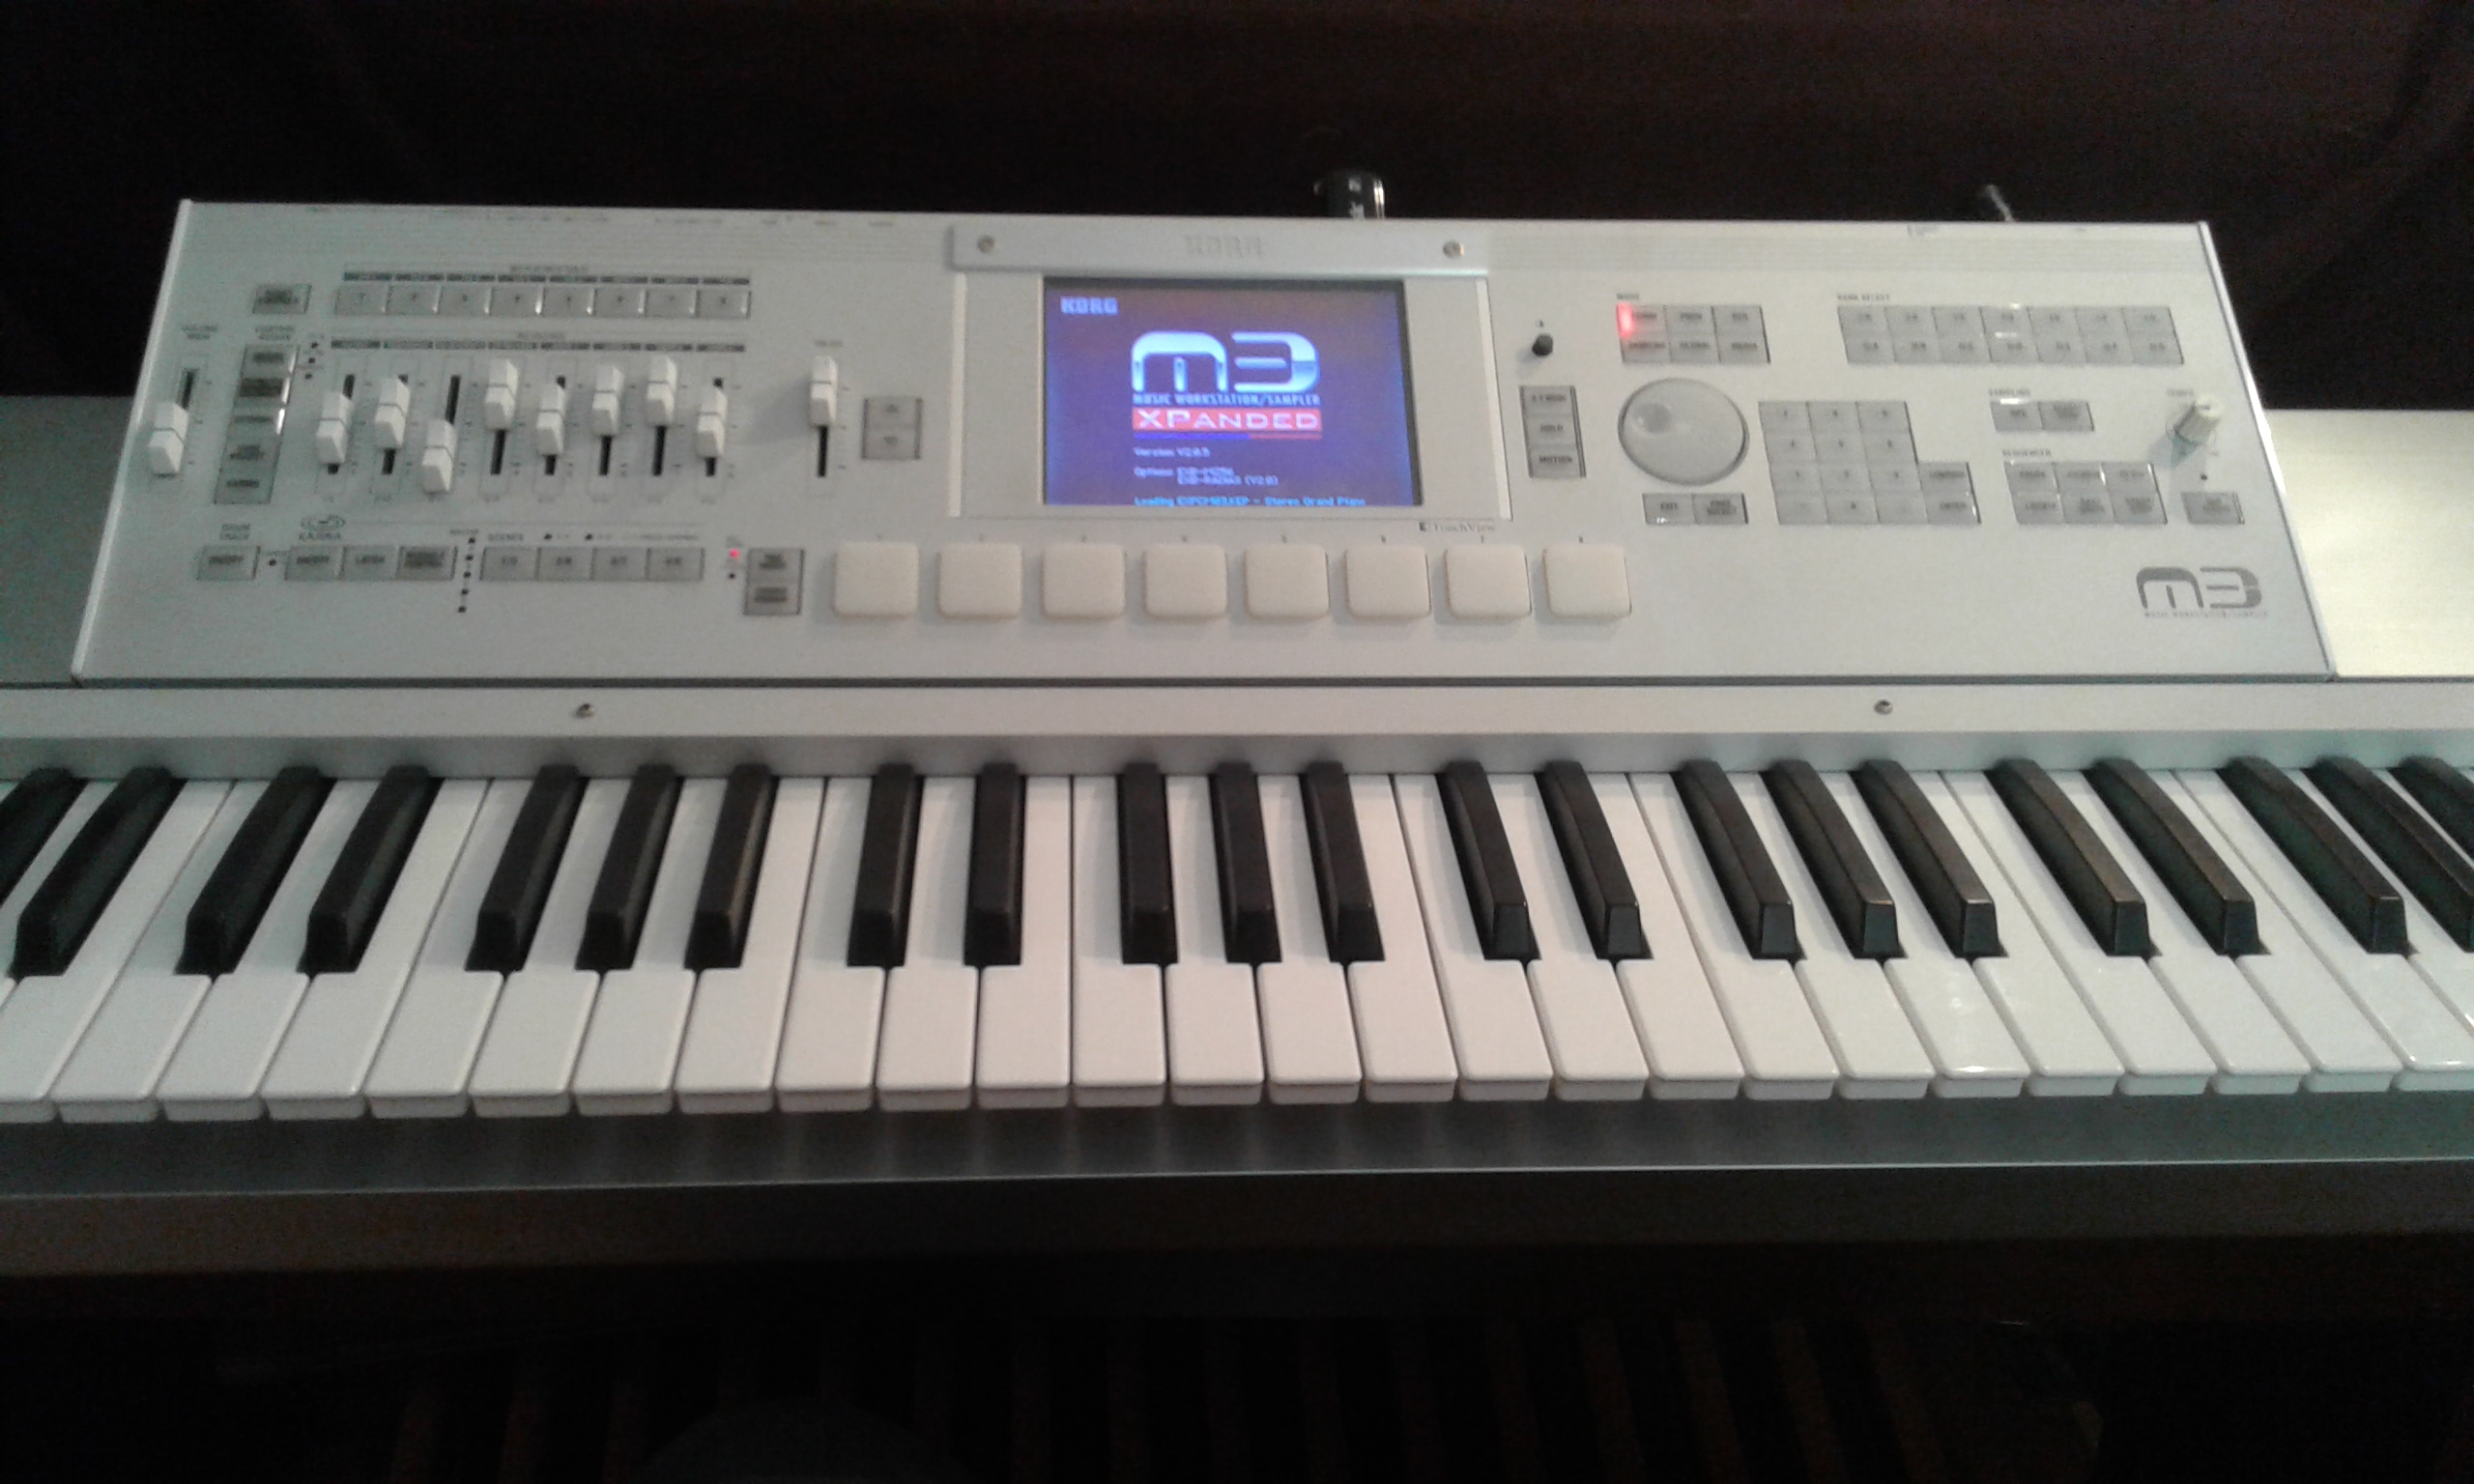 new sounds for the korg m3